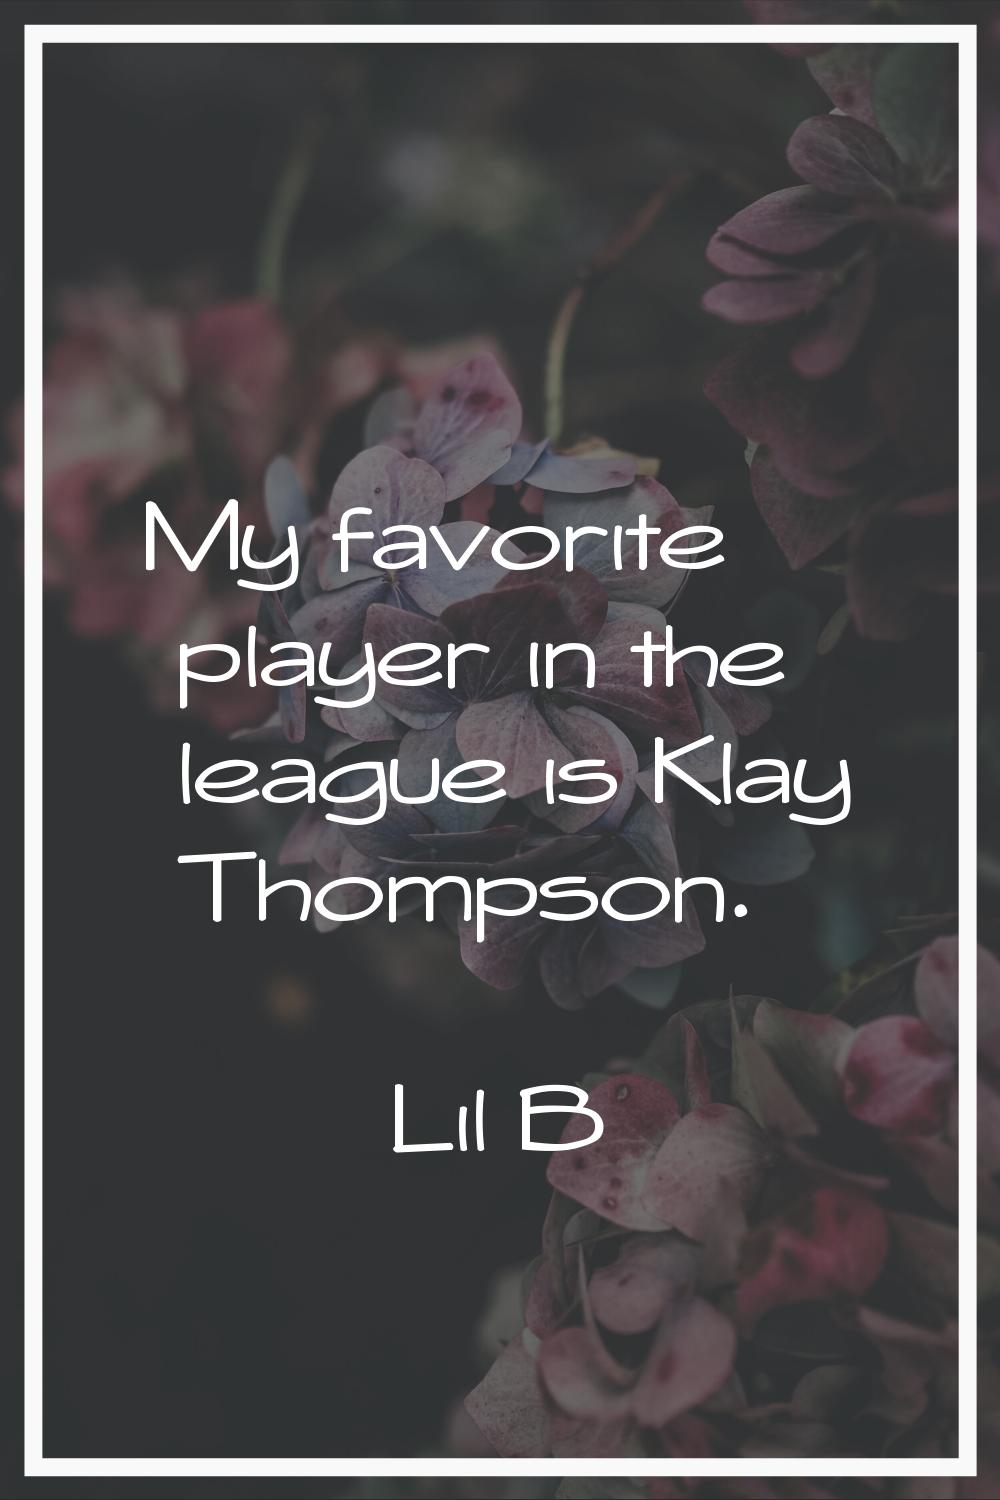 My favorite player in the league is Klay Thompson.